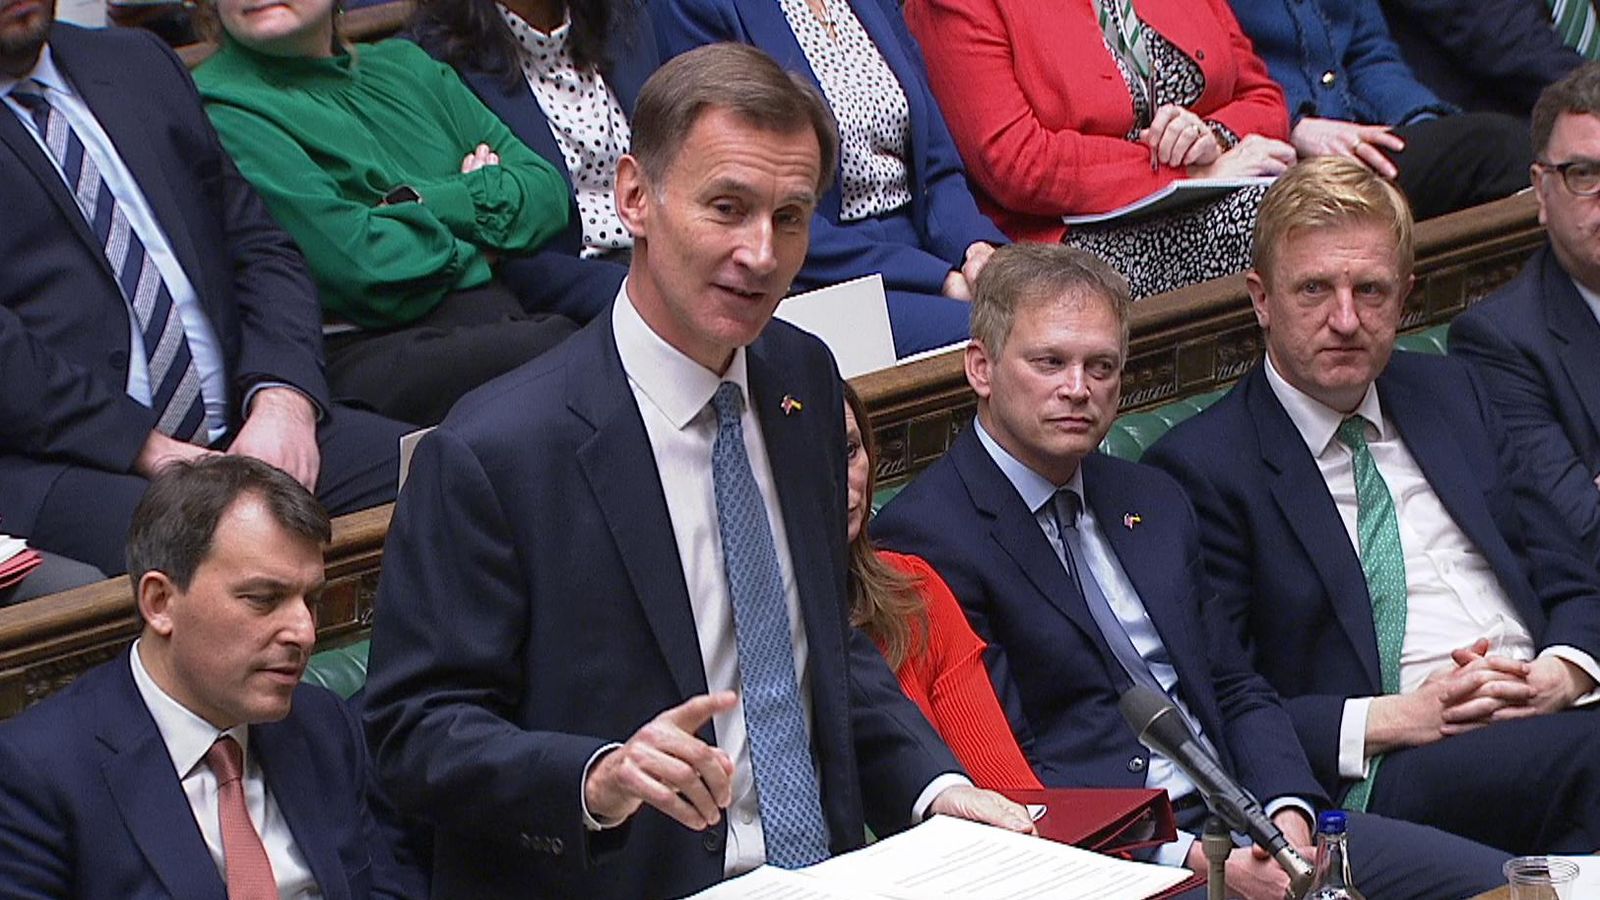 Autumn statement: Chancellor Jeremy Hunt reduces higher rate of income tax threshold to £125,140